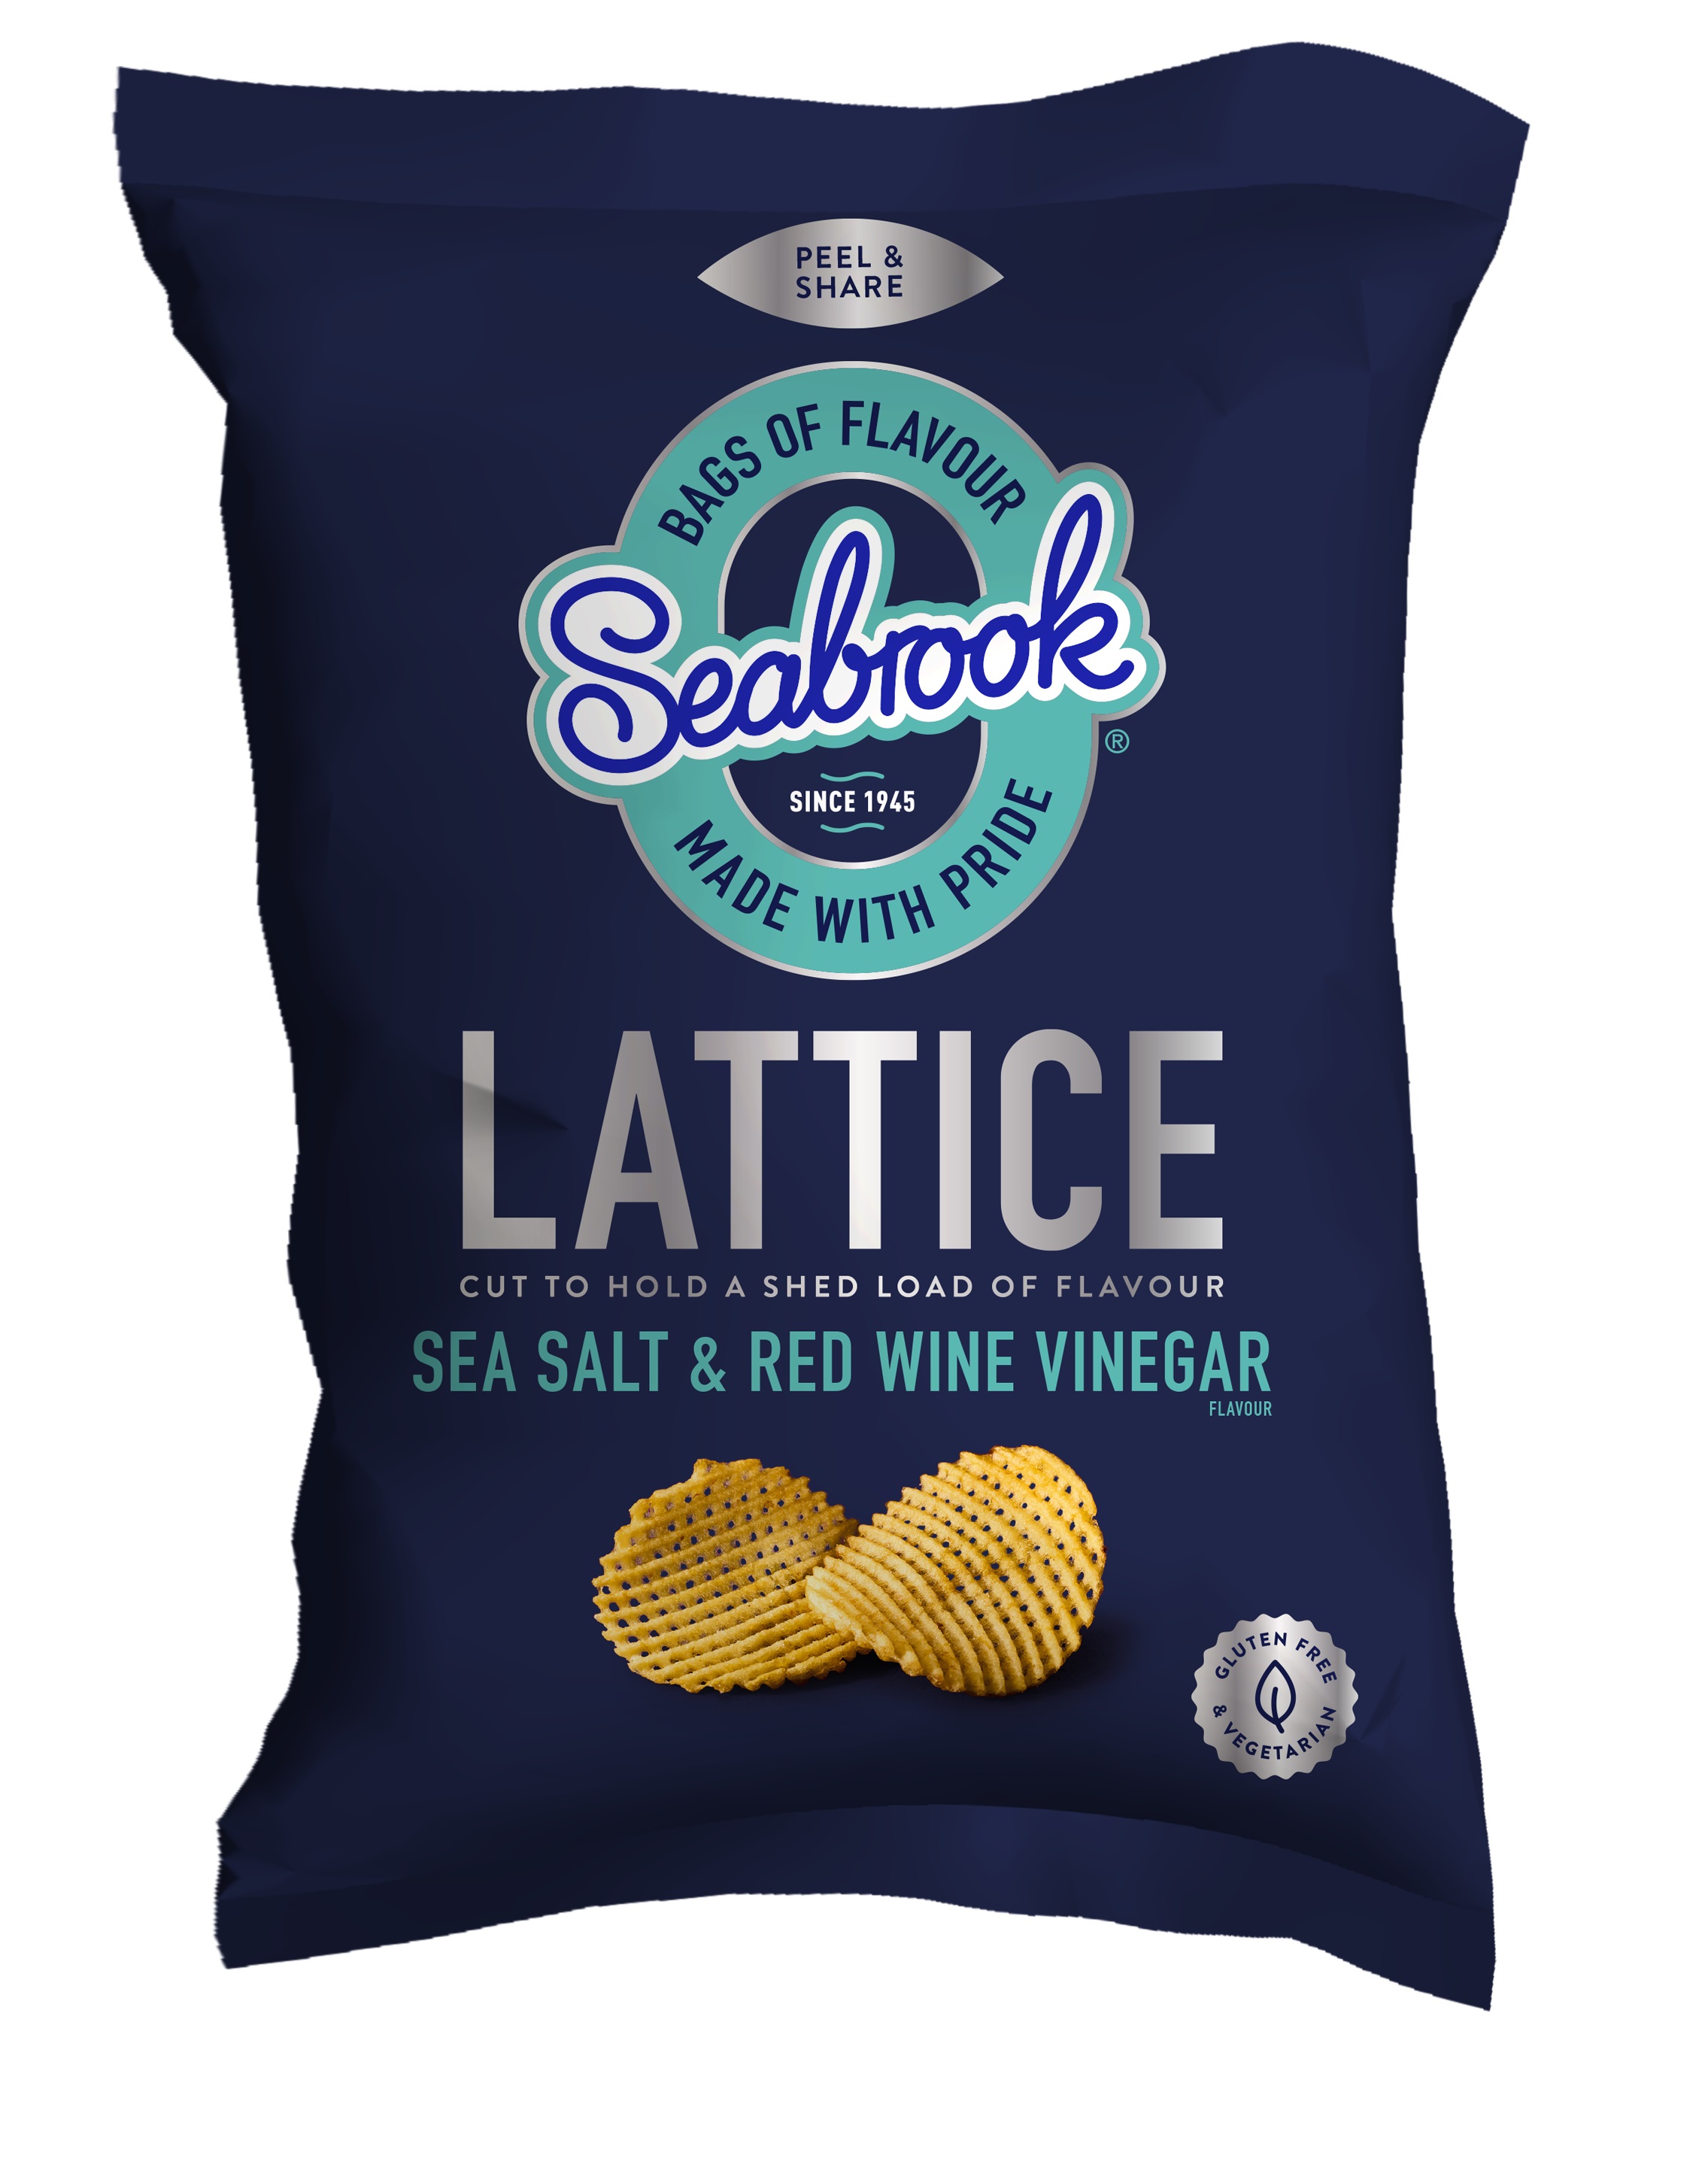 Seabrook Crisps Reveals New Premium Packaging Packaging Today